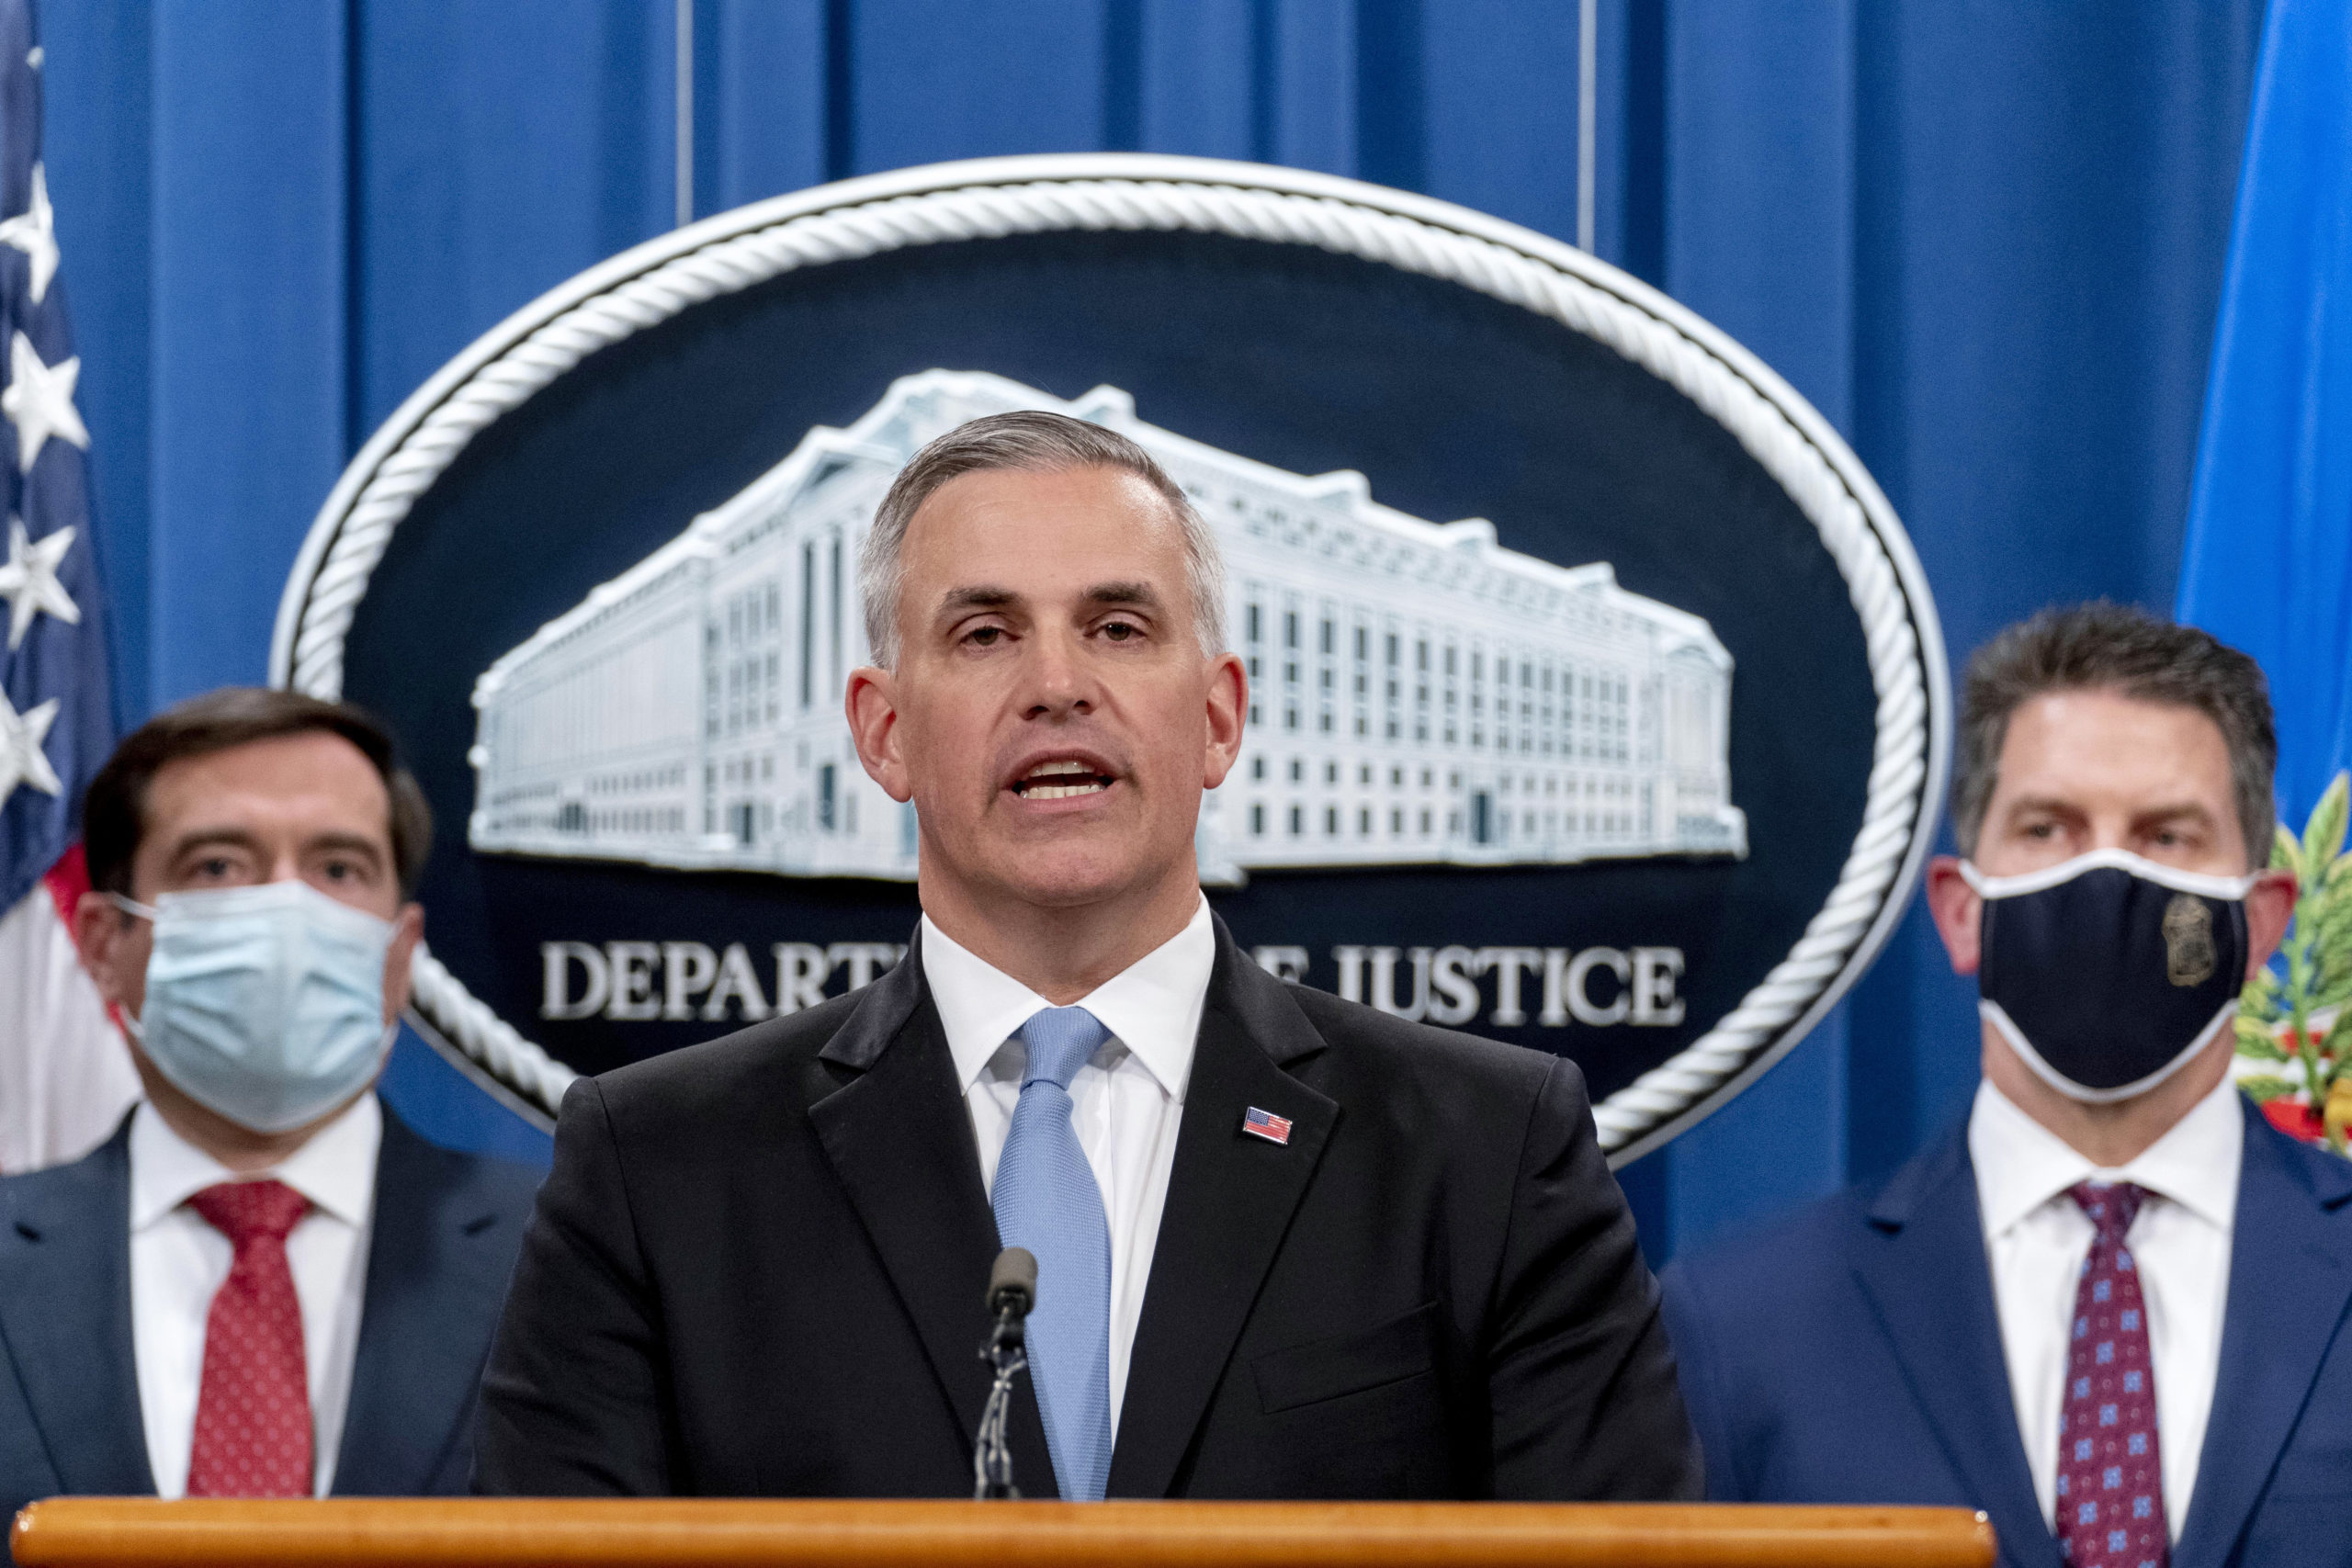 WASHINGTON, DC - OCTOBER 19: U.S. Attorney for the Western District of Pennsylvania Scott Brady, center, accompanied by Assistant Attorney General for the National Security Division John Demers, left, and FBI Deputy Director David Bowdich right, speaks at a news conference at the Department of Justice, on October 19, 2020 in Washington, DC. The Justice Department announced an indictment against six Russia GRU officers charged with engaging in a series of hacking and malware deployment operations to attack other countries' infrastructure, elections and other actions designed to further Russia's interests. (Photo by Andrew Harnik - Pool/Getty Images)